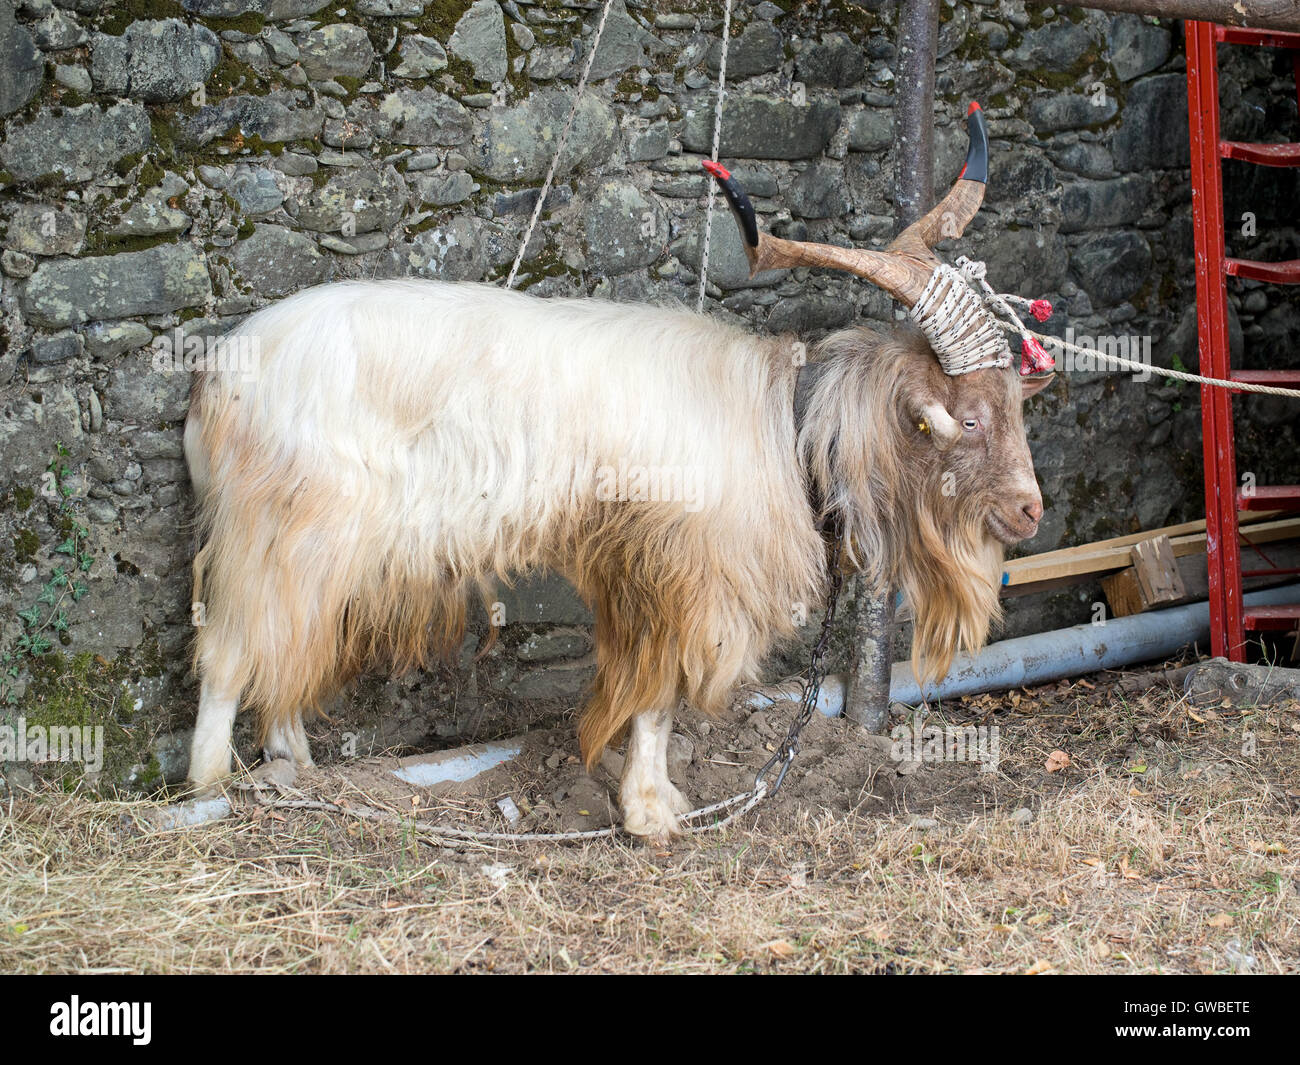 Goat. Tethered, with impressive horns. Stock Photo